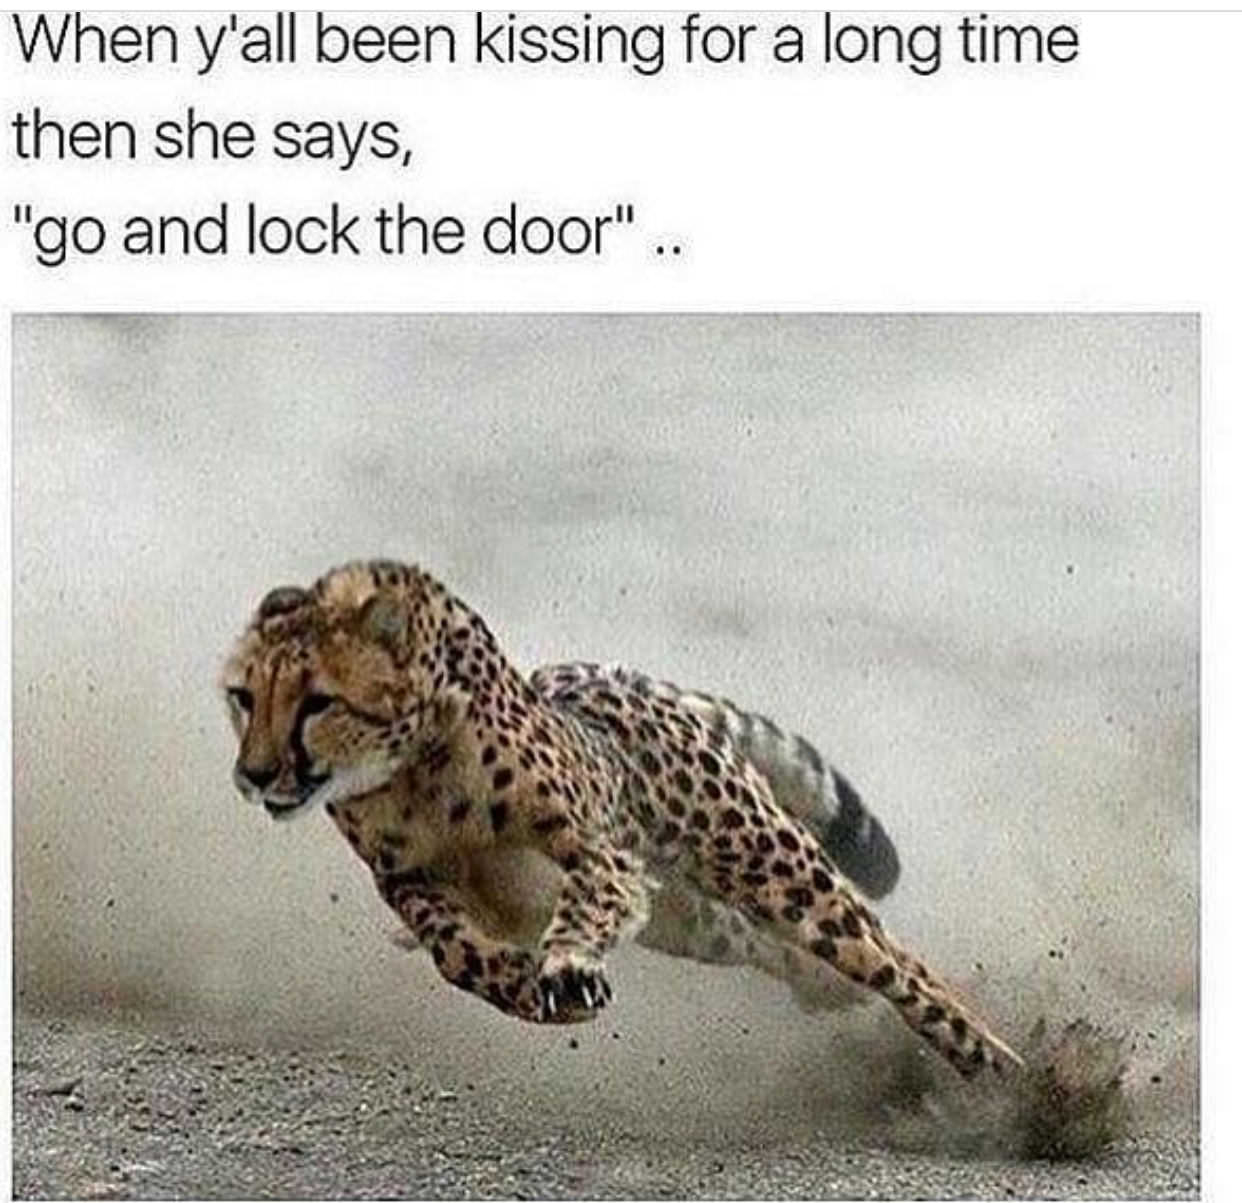 funny animal memes - When y'all been kissing for a long time then she says, "go and lock the door"..